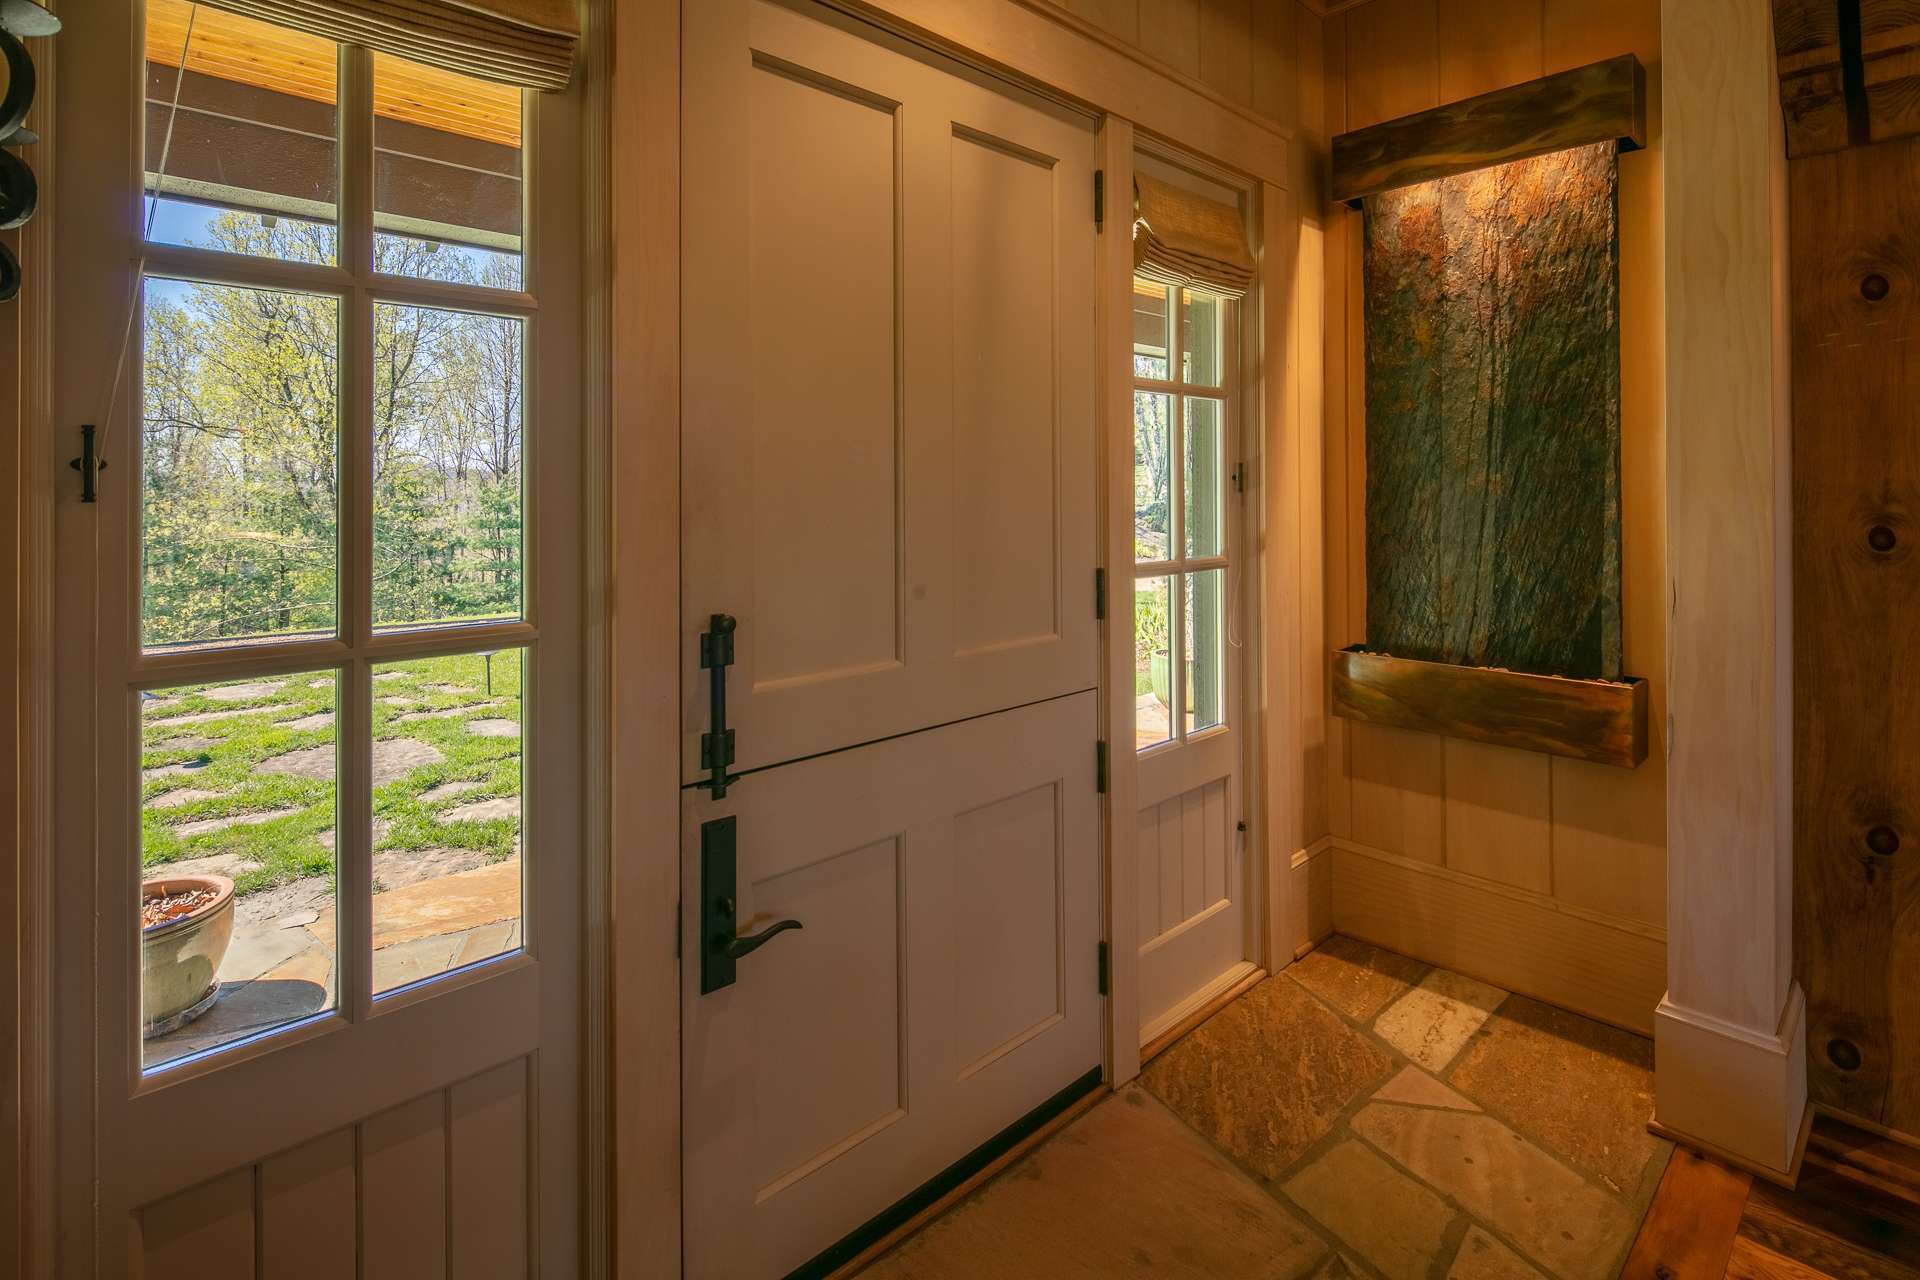 The main entrance features a Dutch door and a water fountain on the wall leading to a spacious great room which is flanked by two stacked-stone wood burning fireplaces with gas starters.